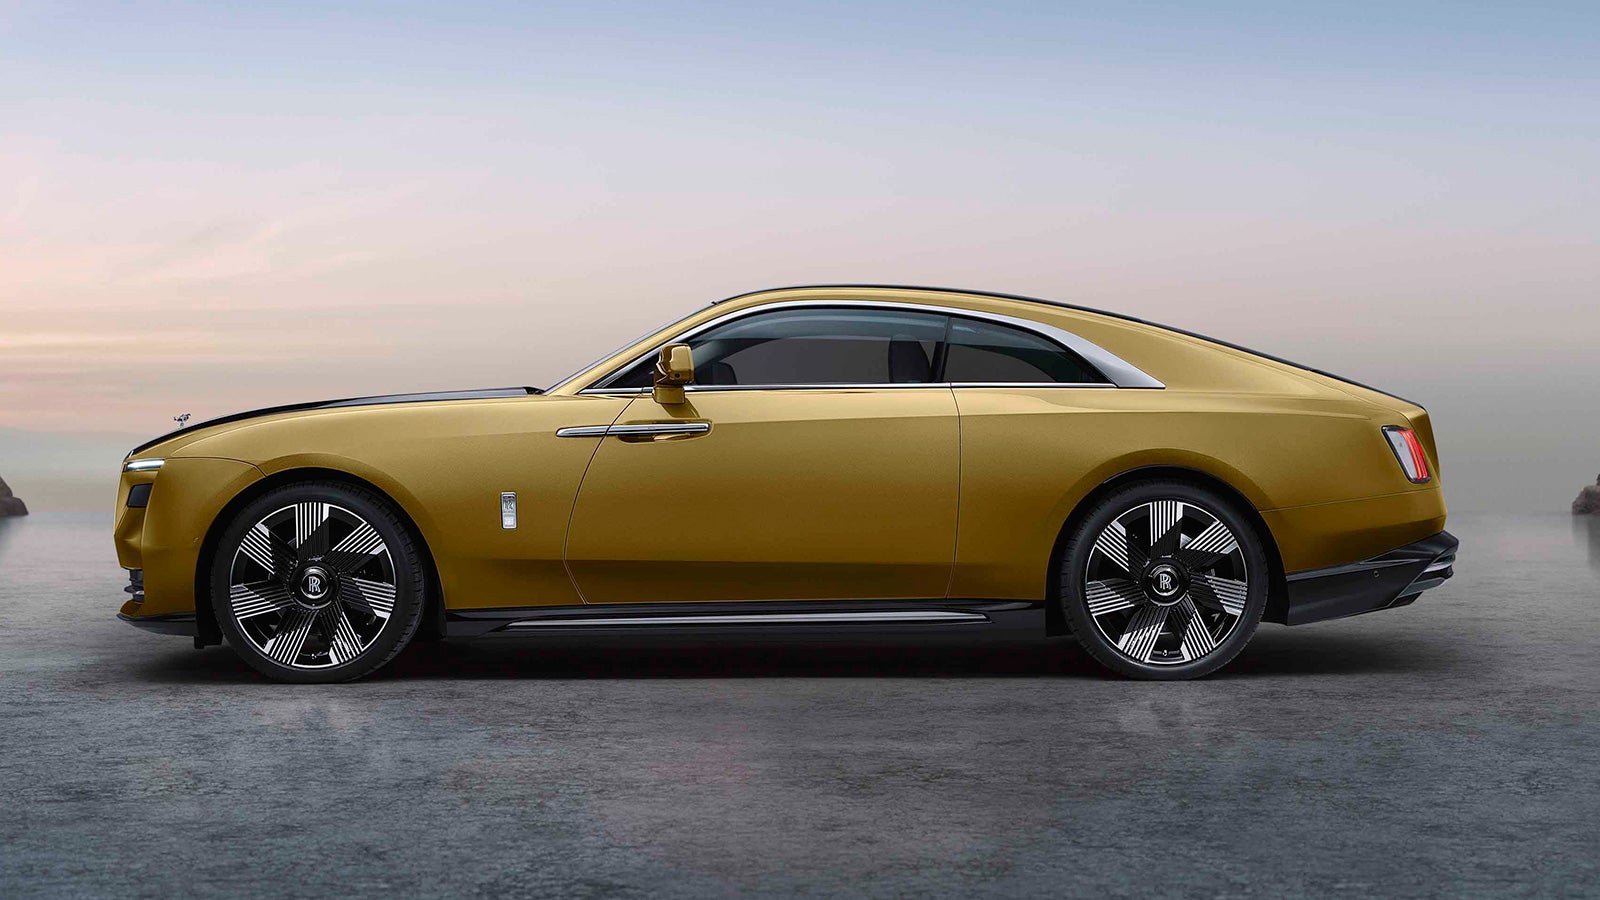 The 2023 Rolls-Royce Spectre Is an Electric Car That Doesn’t Look Like One